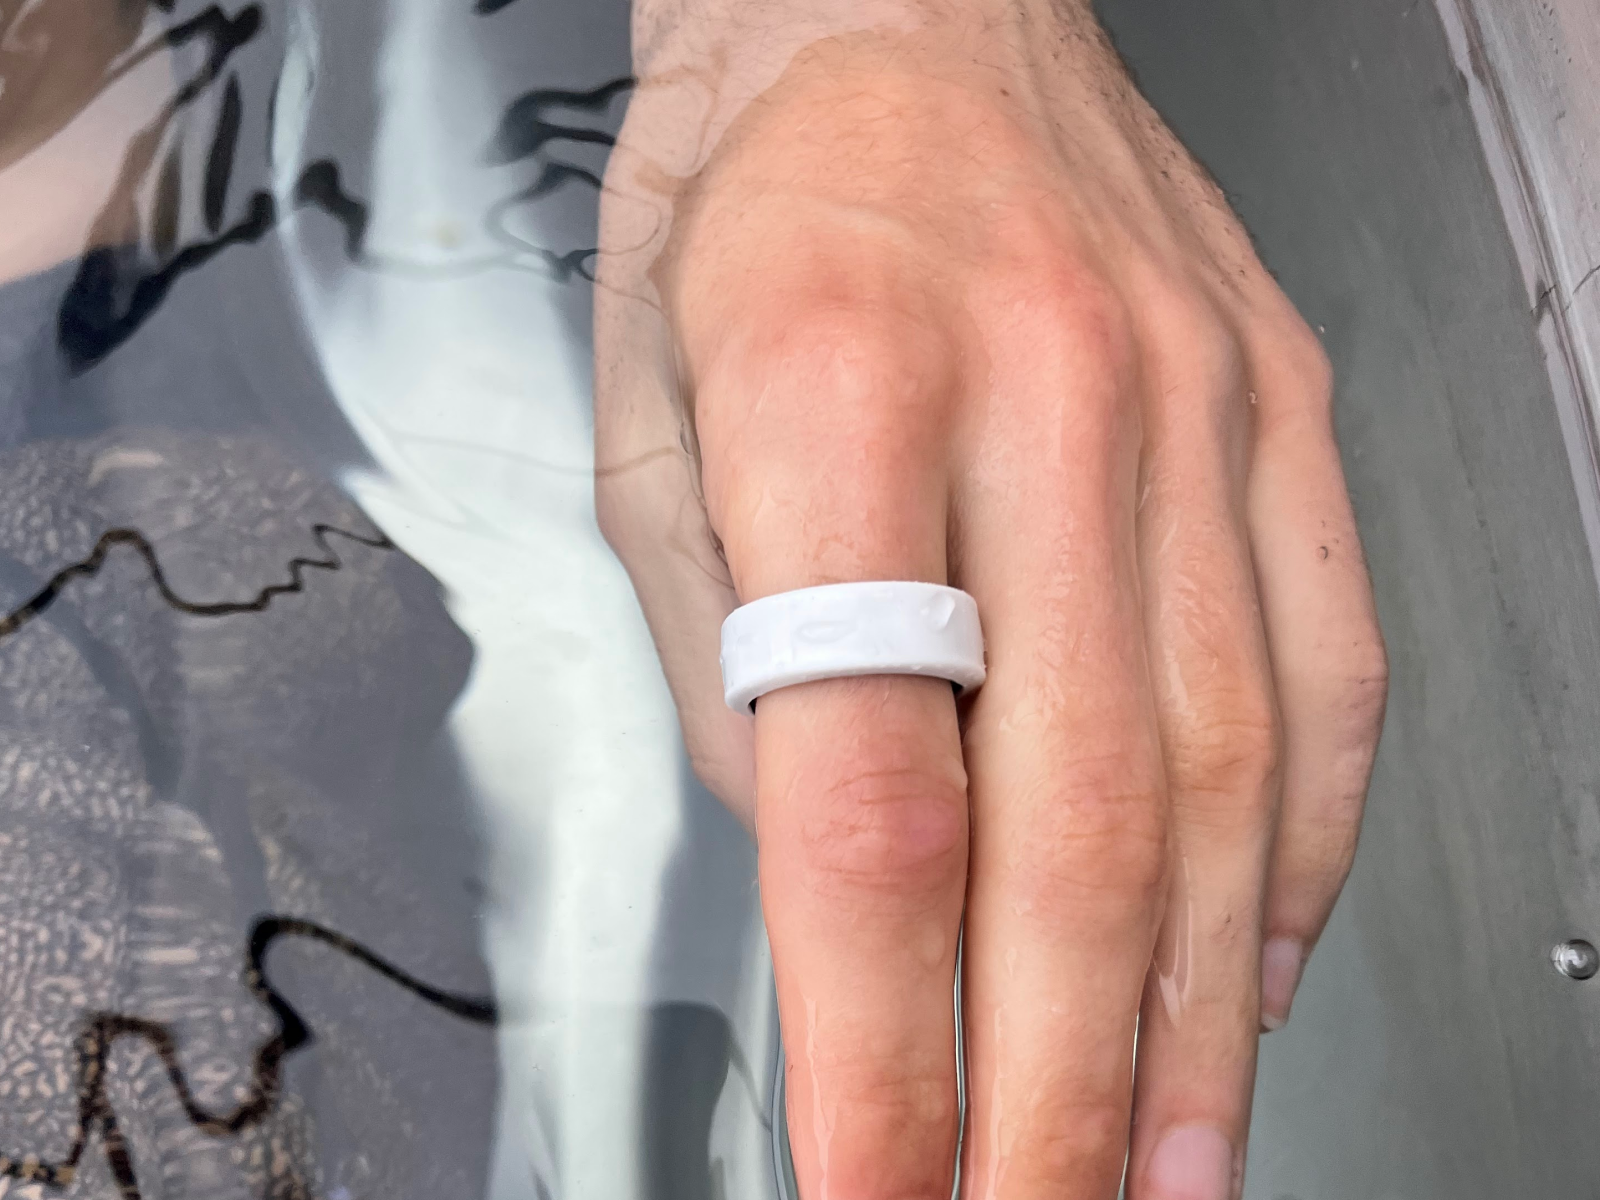  Oura Ring Protector